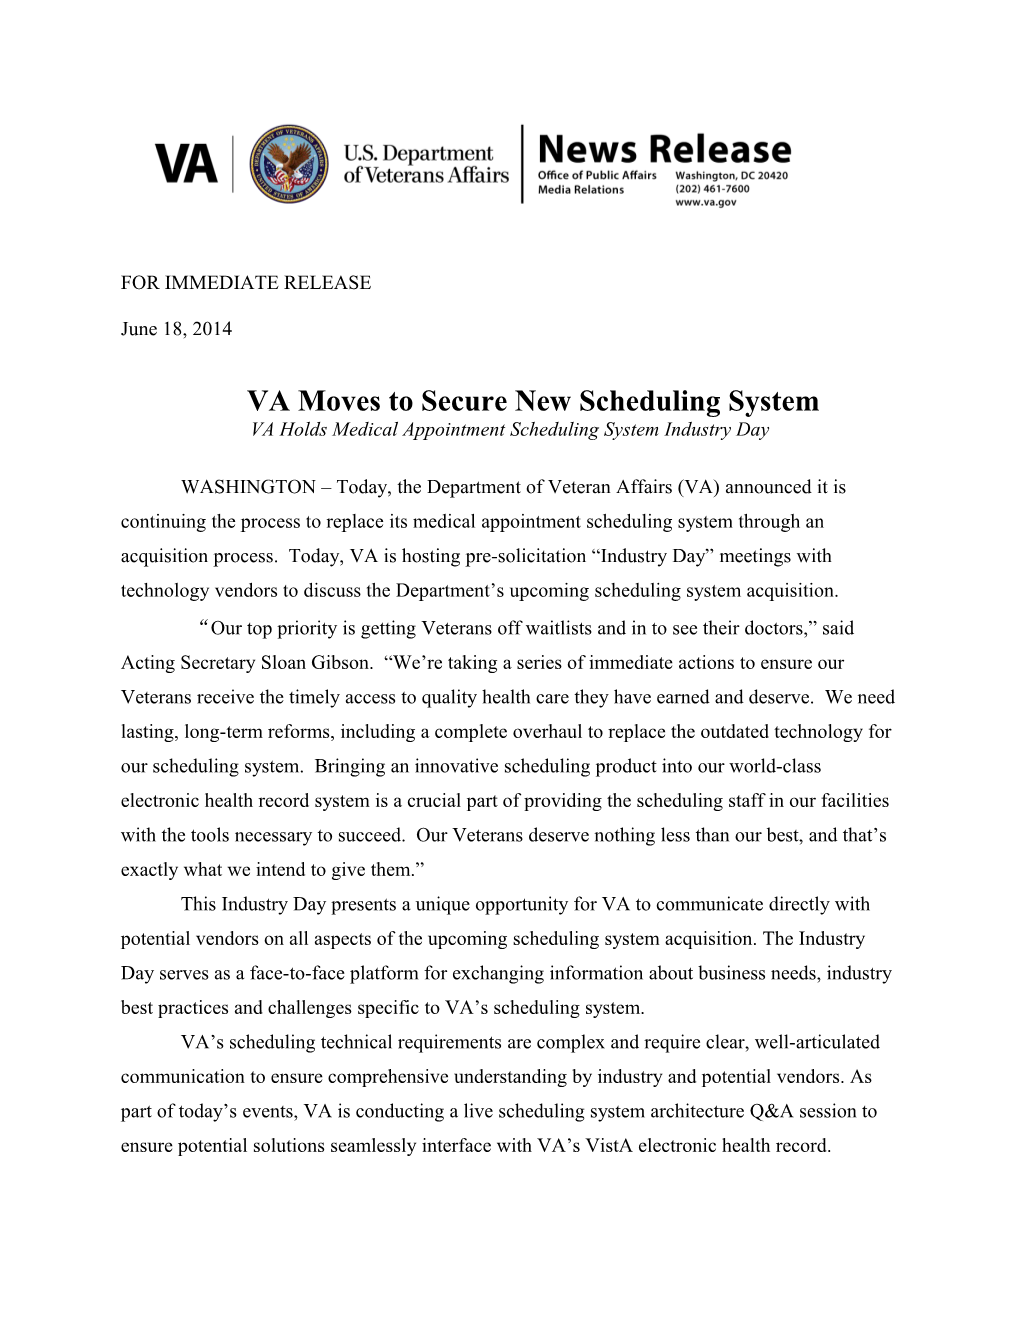 VA Moves to Secure New Scheduling System